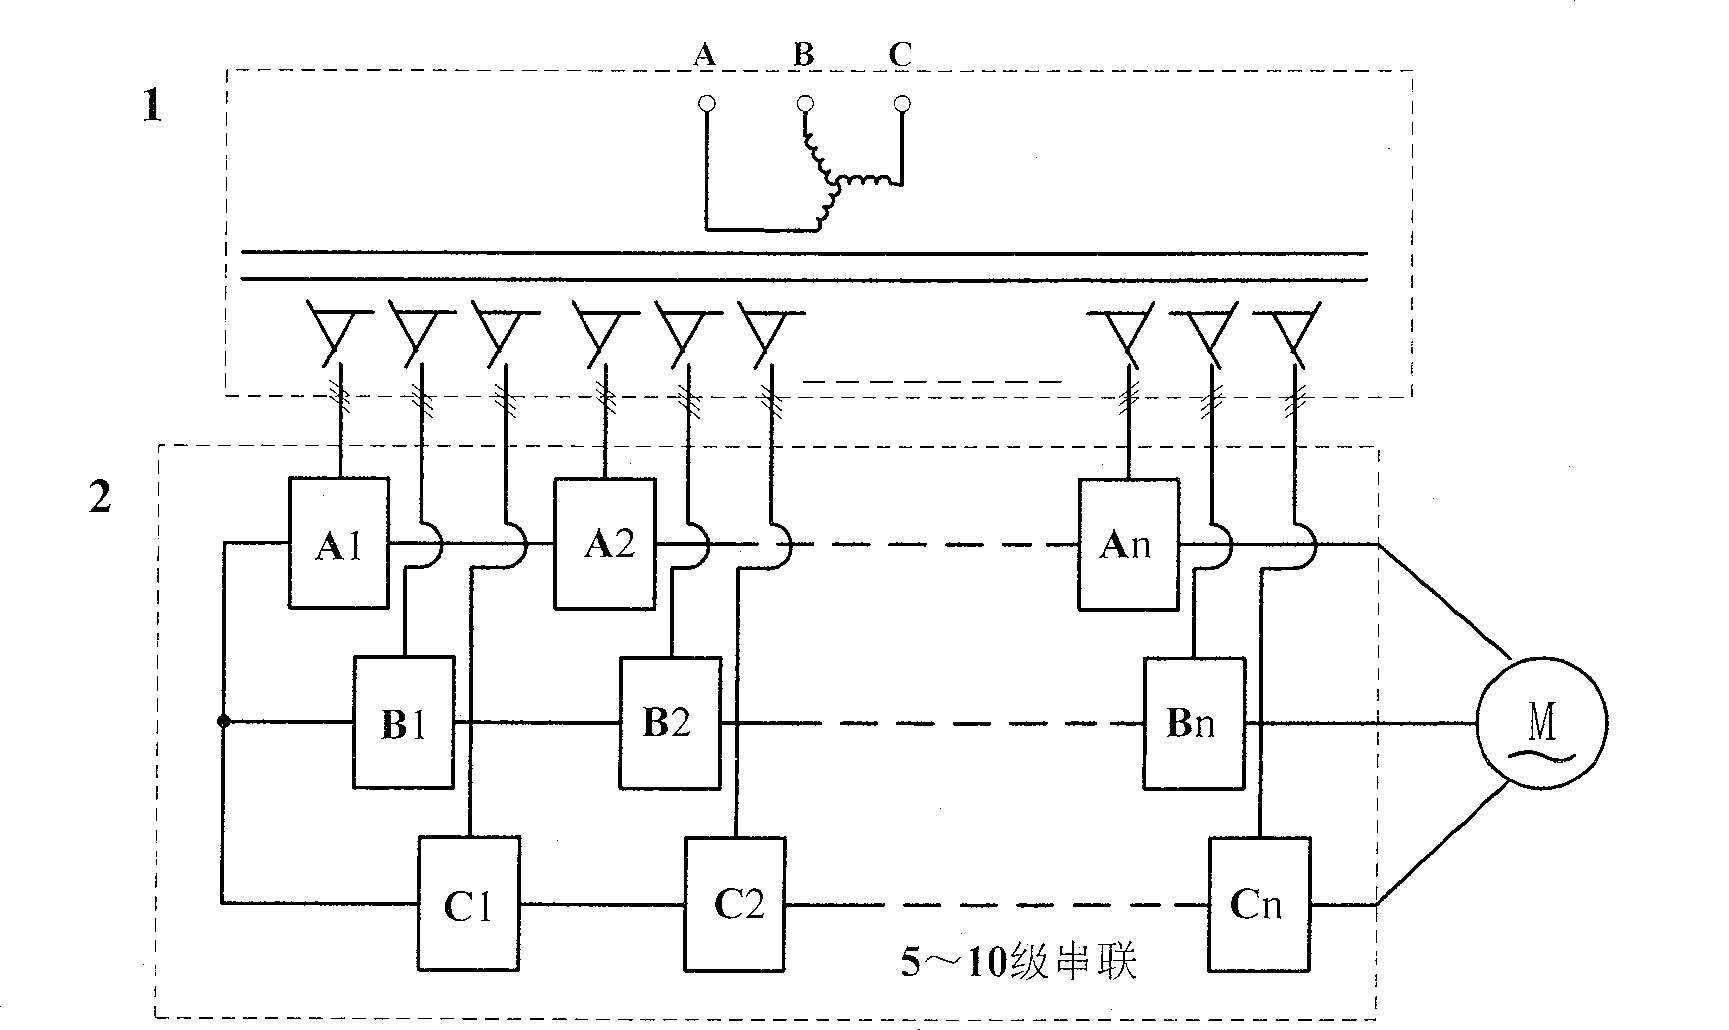 Multi-level frequency conversion driving apparatus with energy conservation unit